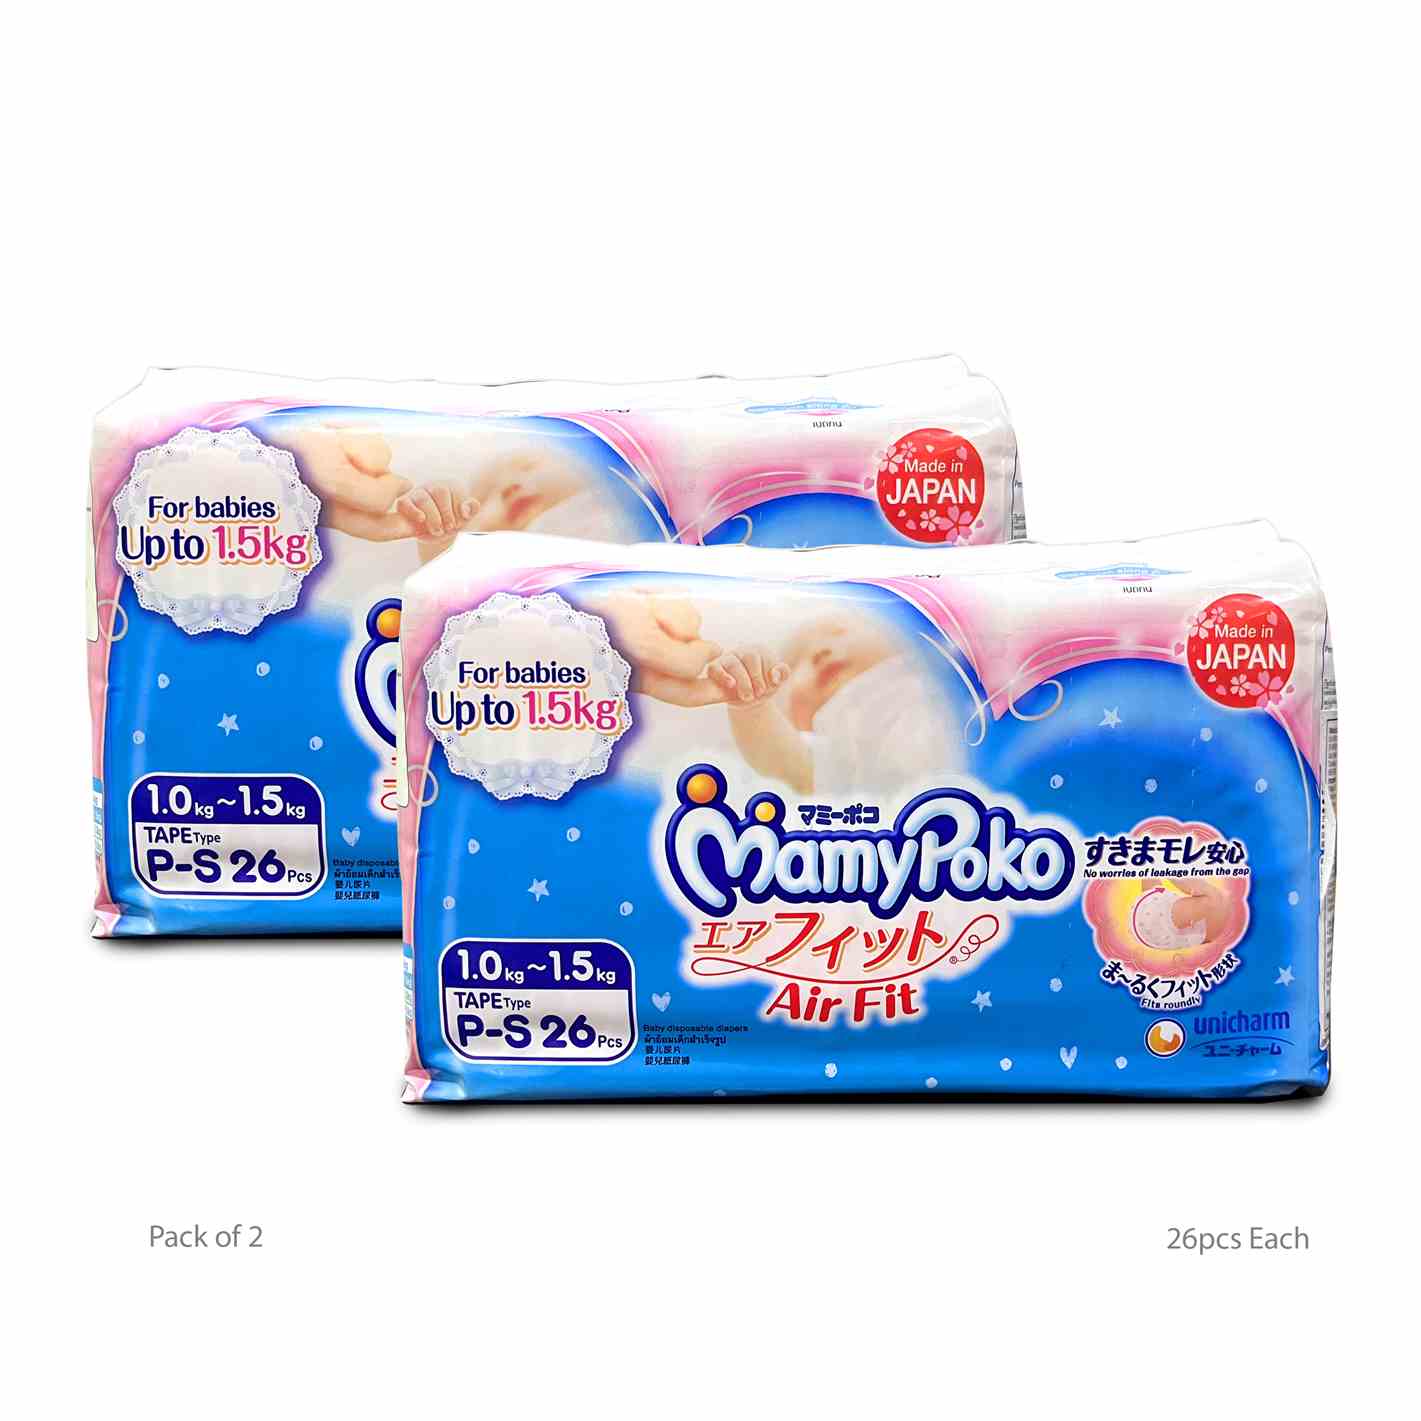 MAMYPOKO Tape Type Diapers for Premature Babies up to 1.5 kg, P-S Pack of 2 26pcs - made in japan